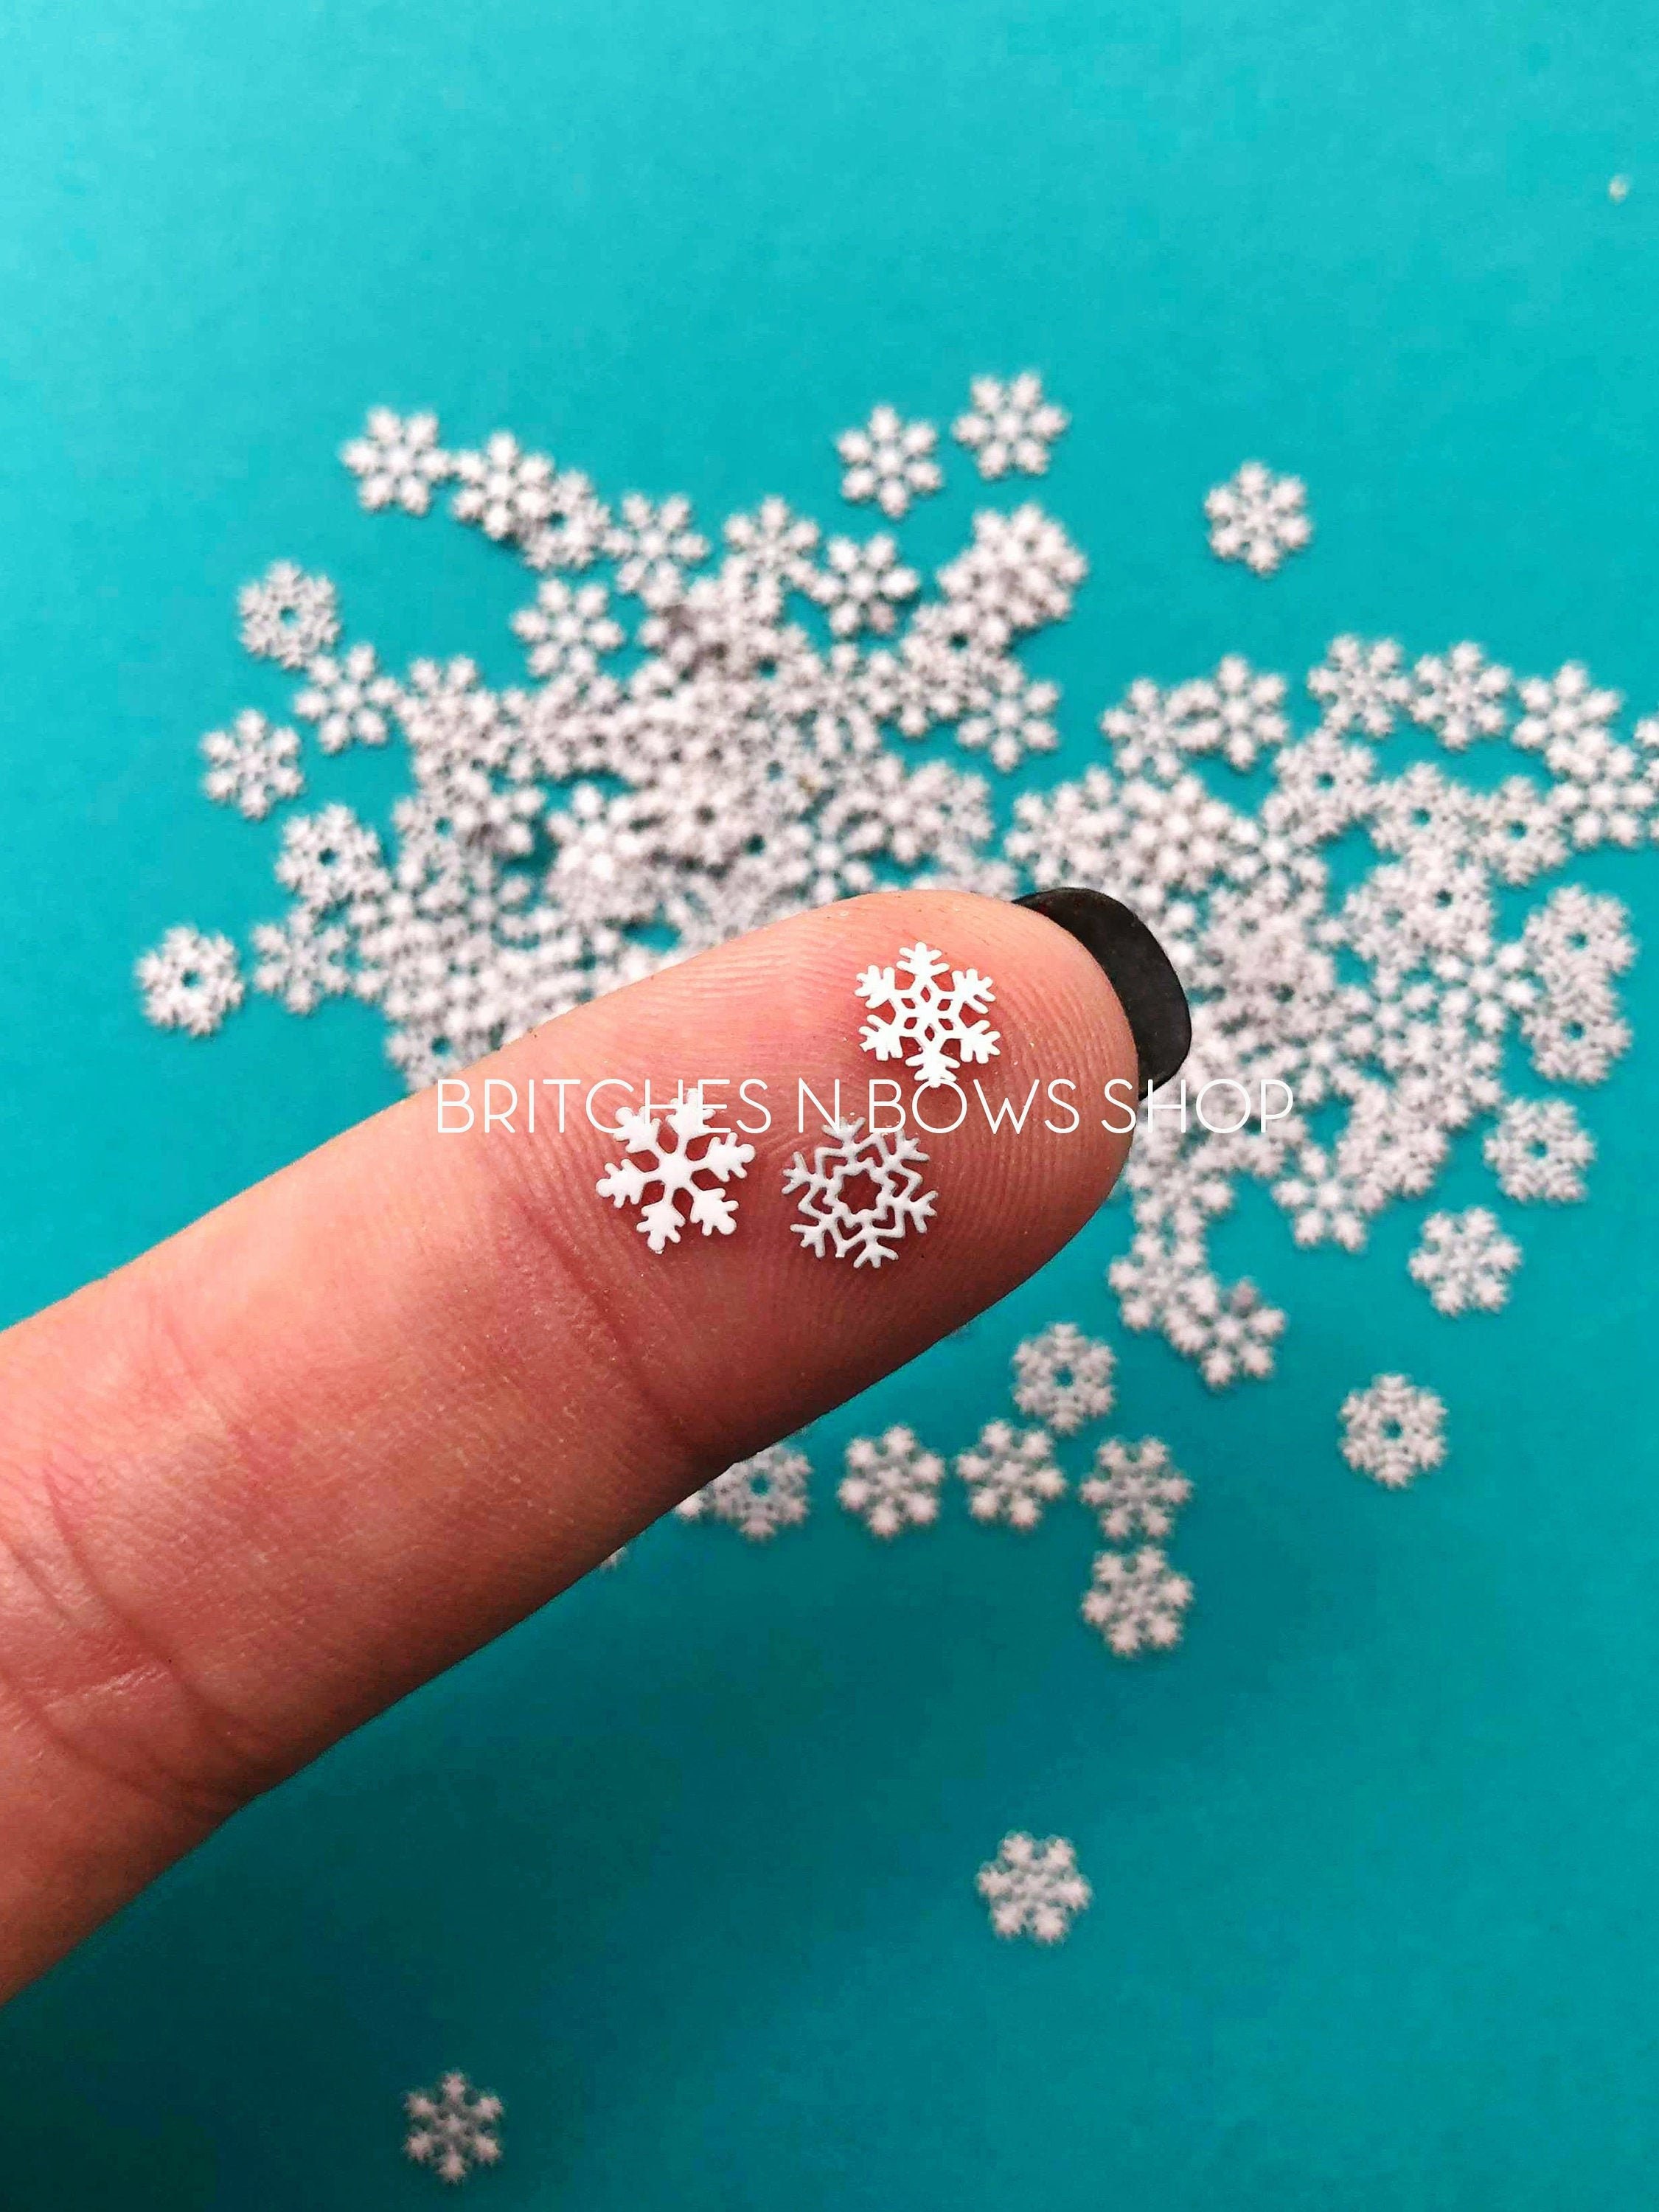 Essentials By Leisure Arts Bead Snowflake Bead 18mm Ice Mix 200pc